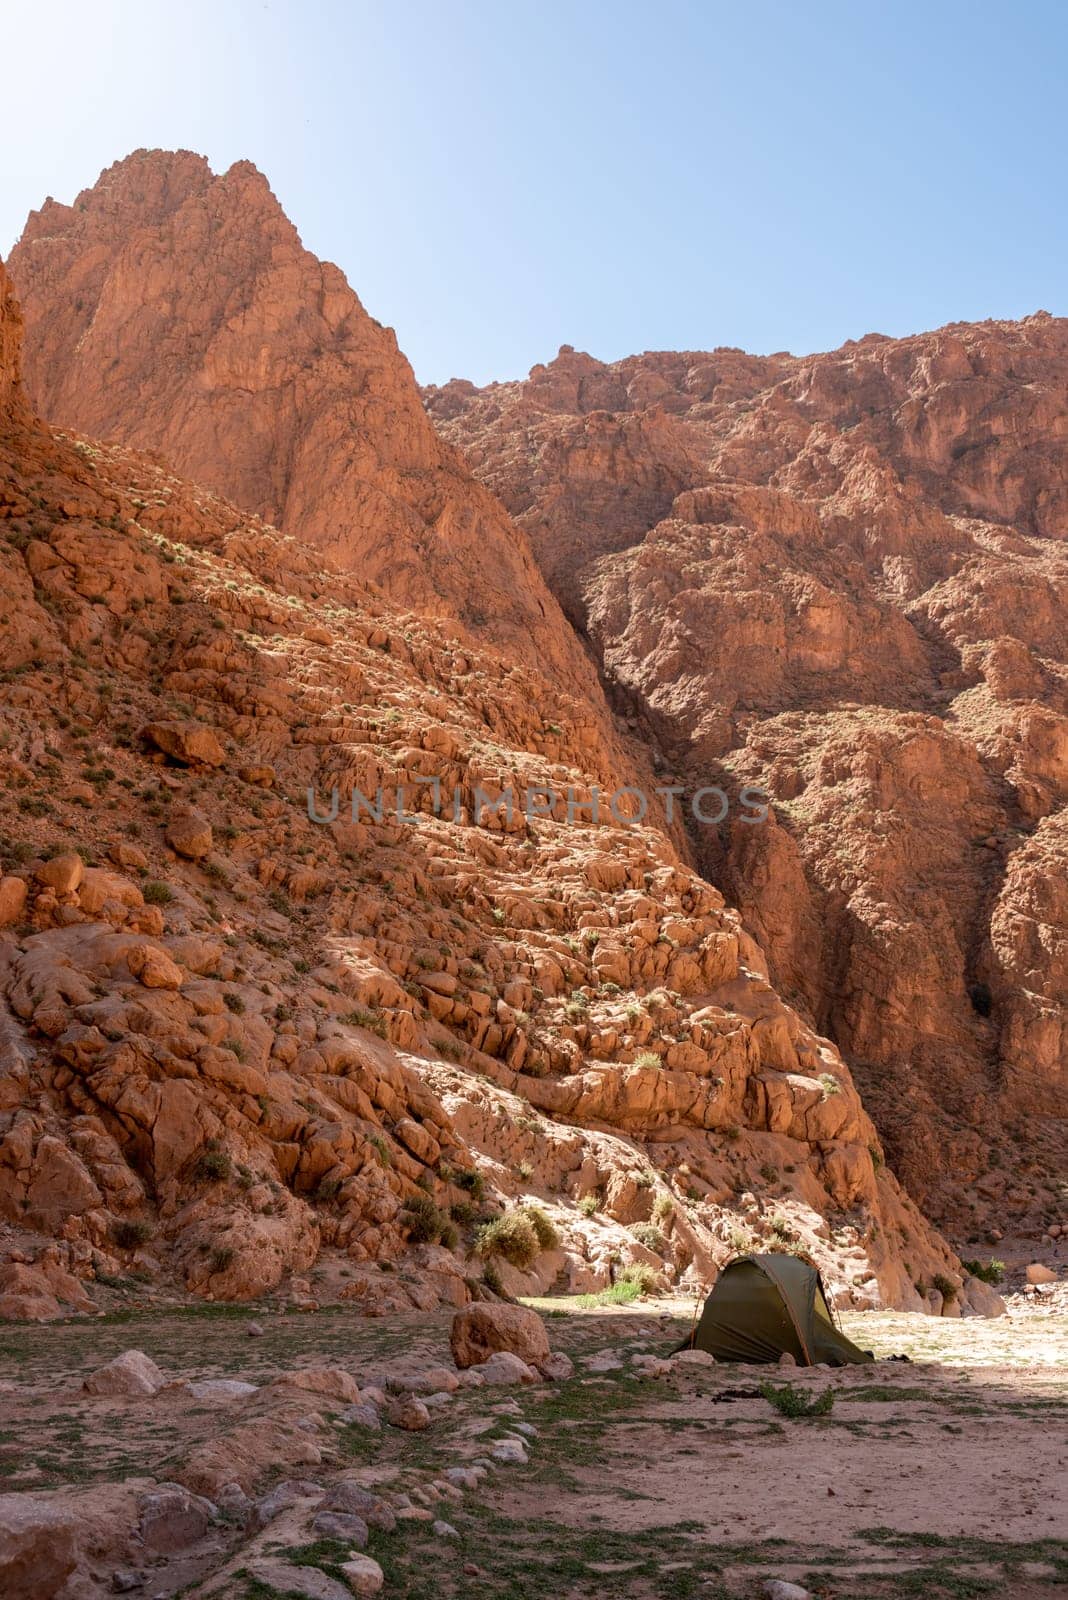 Impressive Todra gorge in the Atlas mountains of Morocco by imagoDens